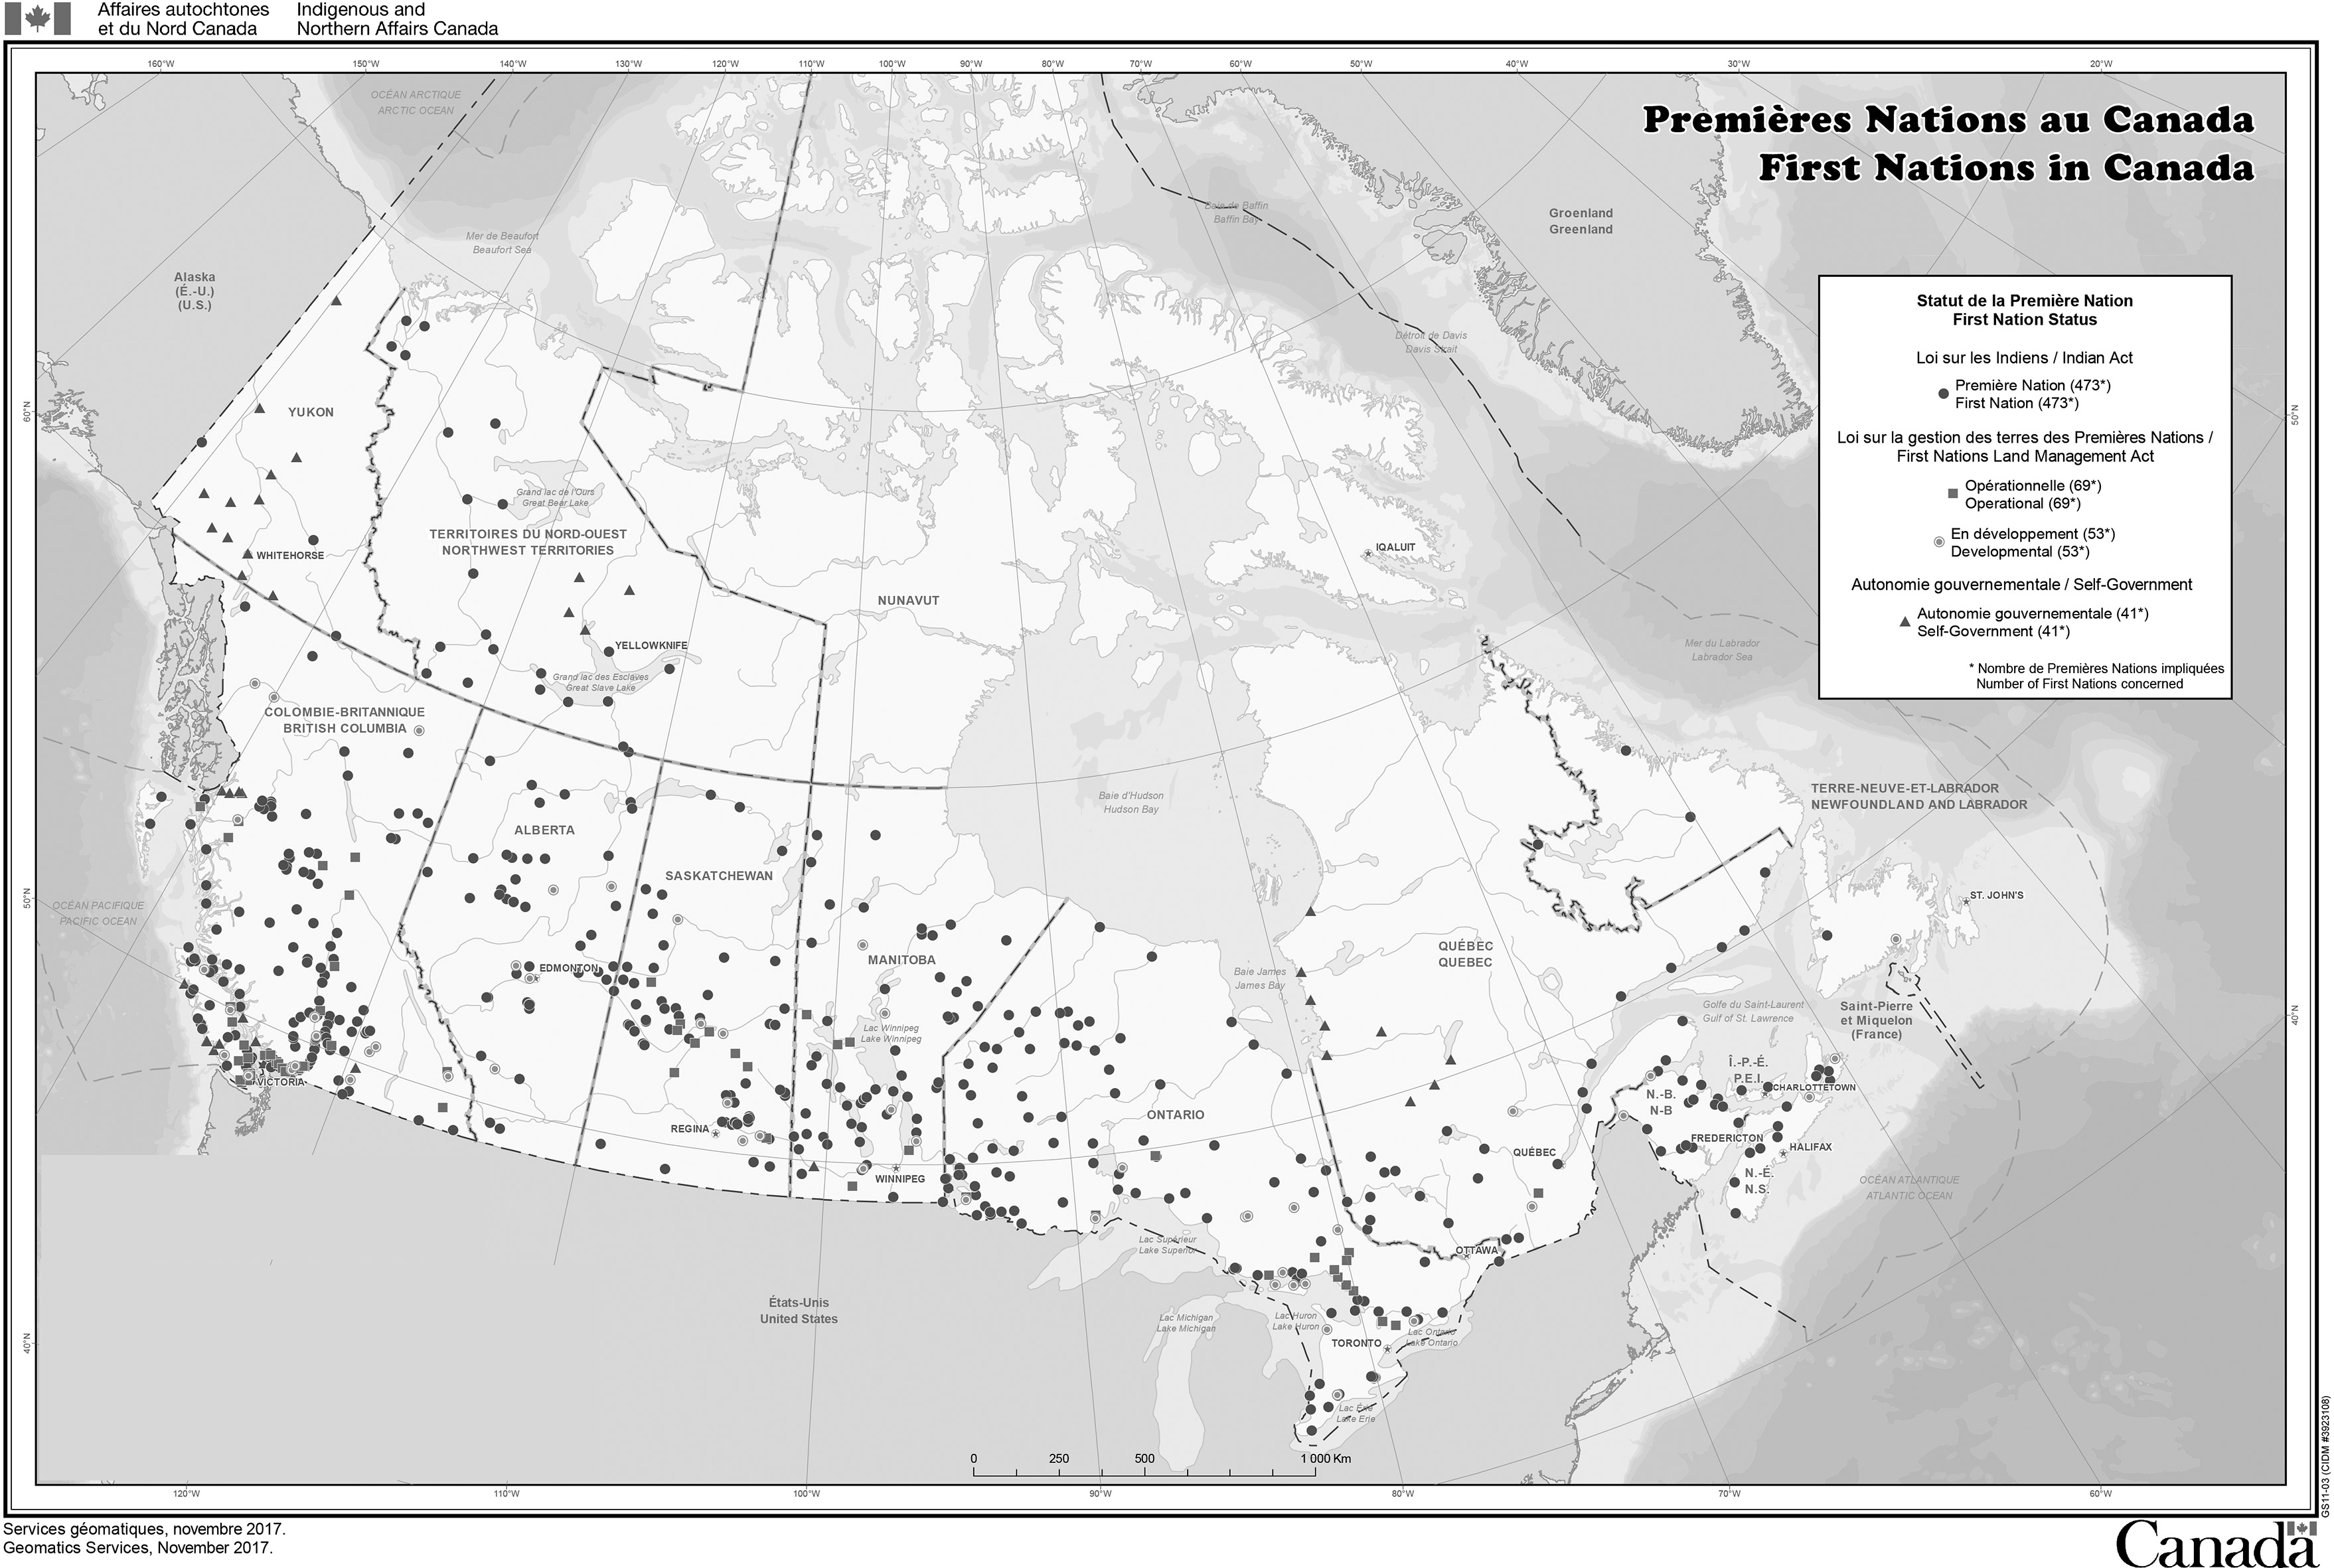 First Nations in Canada. This map illustrates where First Nations communities are located in Canada, as well as shows First Nations status symbolized as the Indian Act, the First Nations Land Management Act or Self-Government. Source: Indigenous and Northern Affairs Canada, Geomatics Services, November 2017.